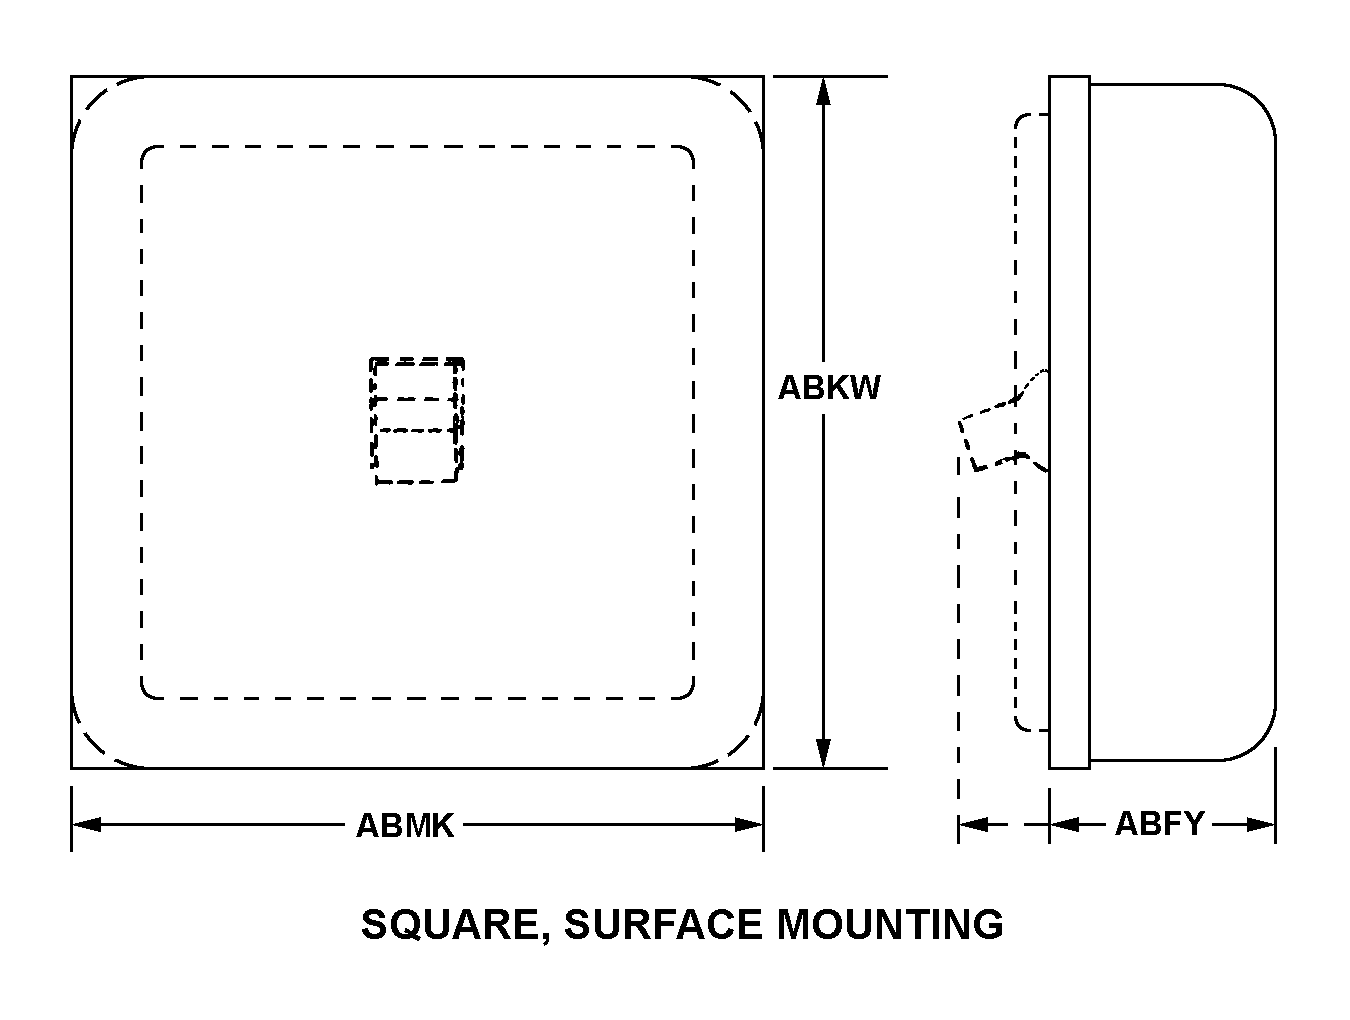 SQUARE, SURFACE MOUNTING style nsn 5930-01-552-6315